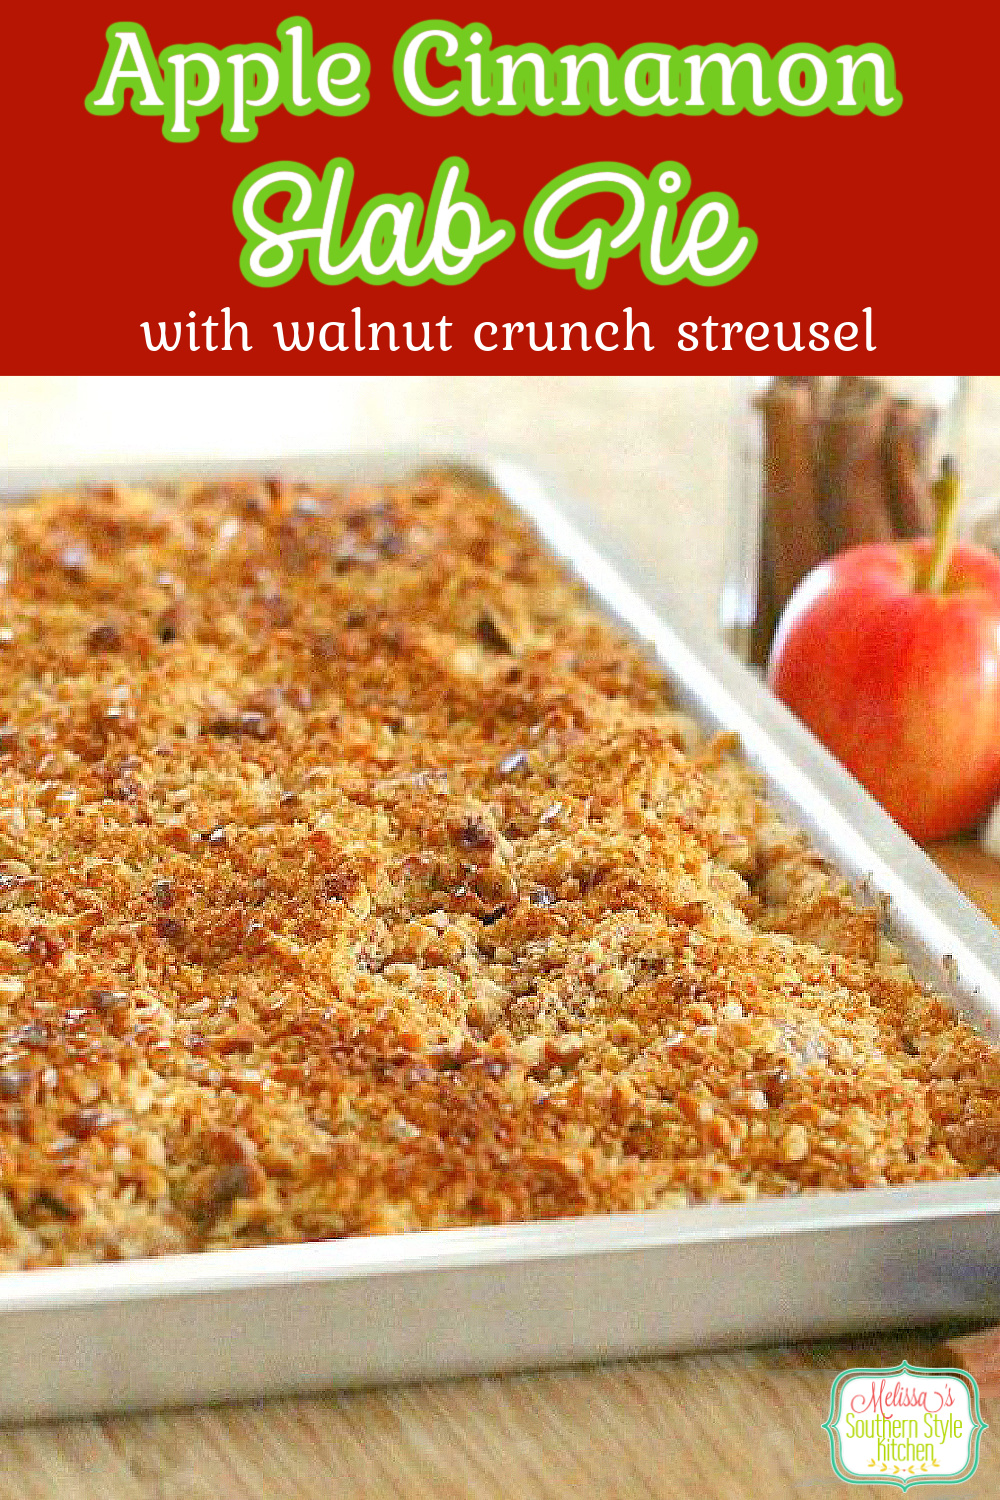 Apple Slab Pie with a Walnut Crunch Streusel makes a stellar sweet ending to any meal #applepie #appleslabpie #streuseltoppedpie #applecrumbpie #apples #fallbaking #harvestrecipes #thanksgivingdesserts #southernrecipes #southernfood #desserts #dessertfoodrecipes via @melissasssk